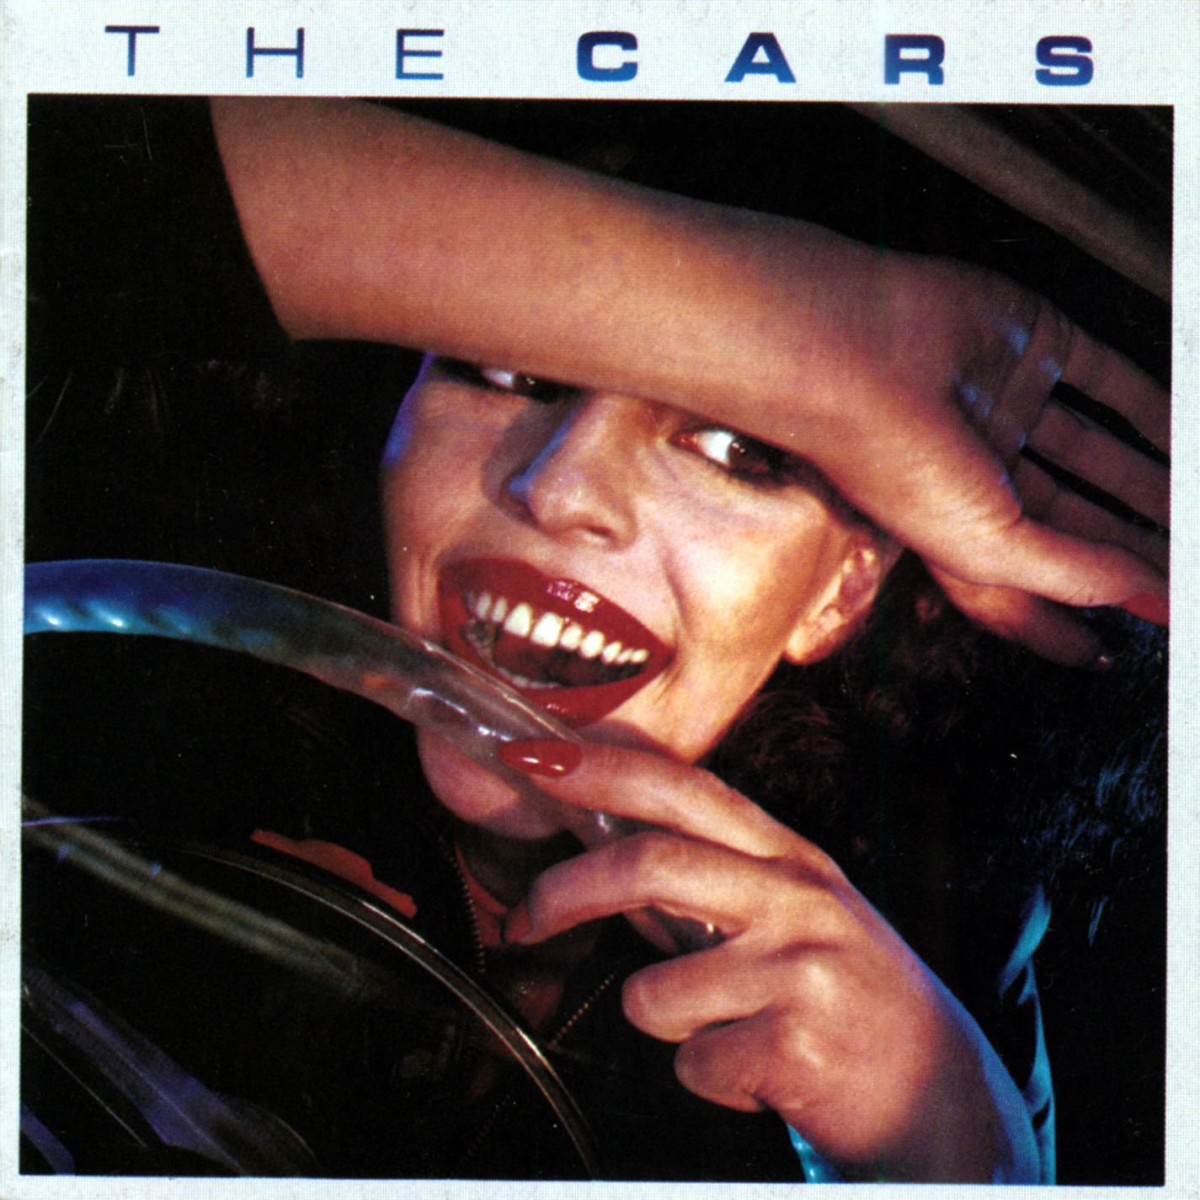 The Cars debut